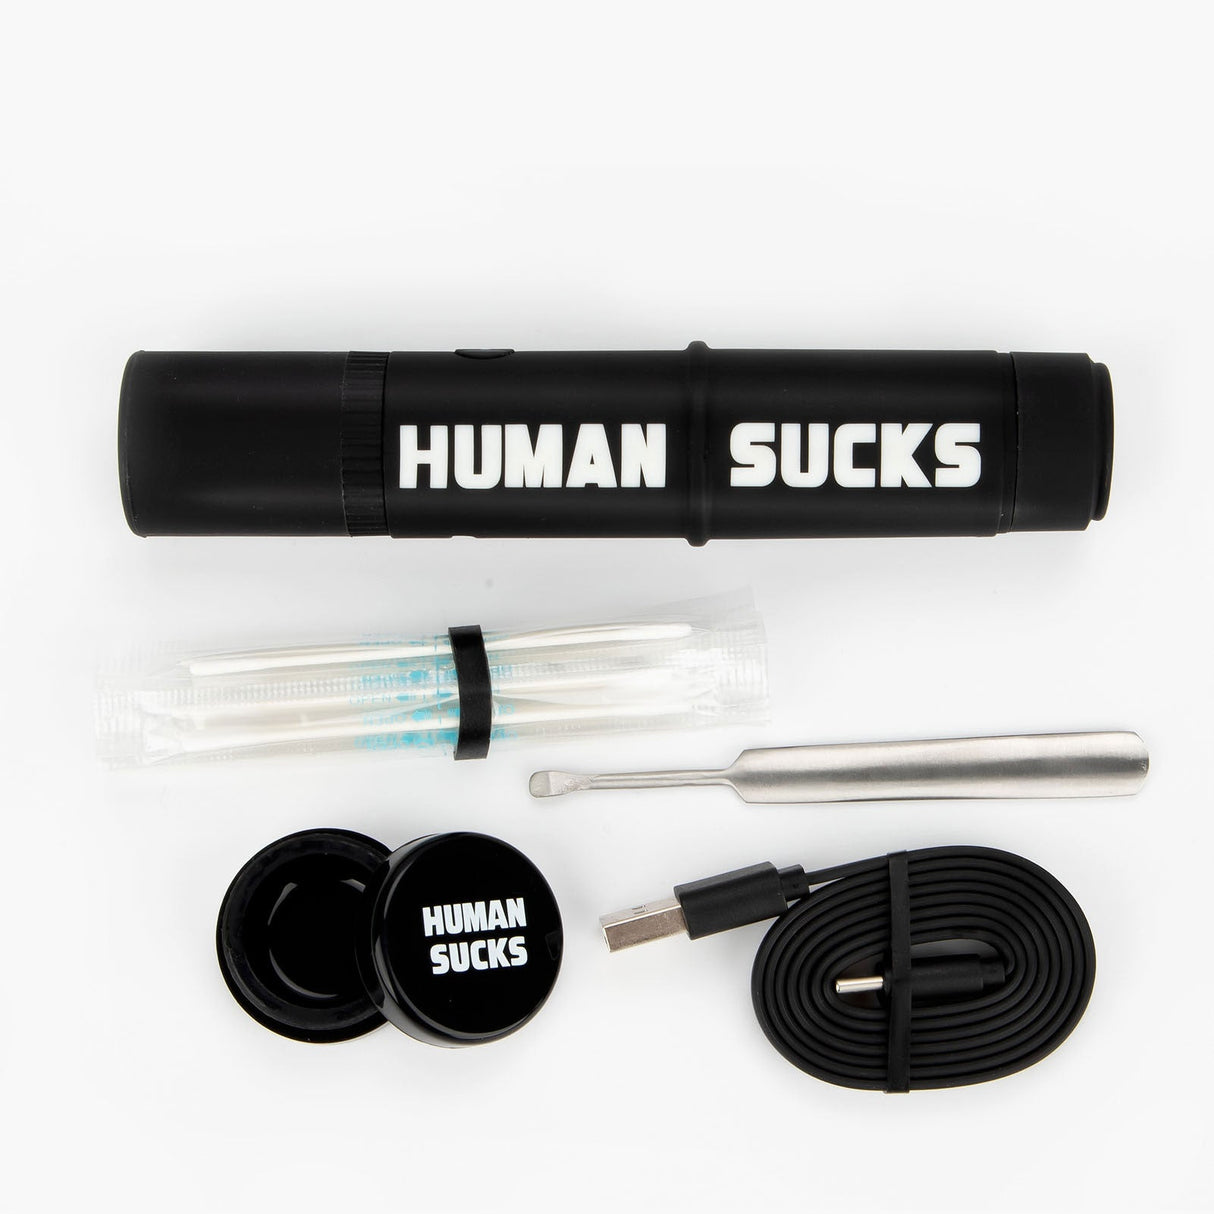 HUMAN SUCKS STINGER 2 electric nectar collector kit with accessories, top view